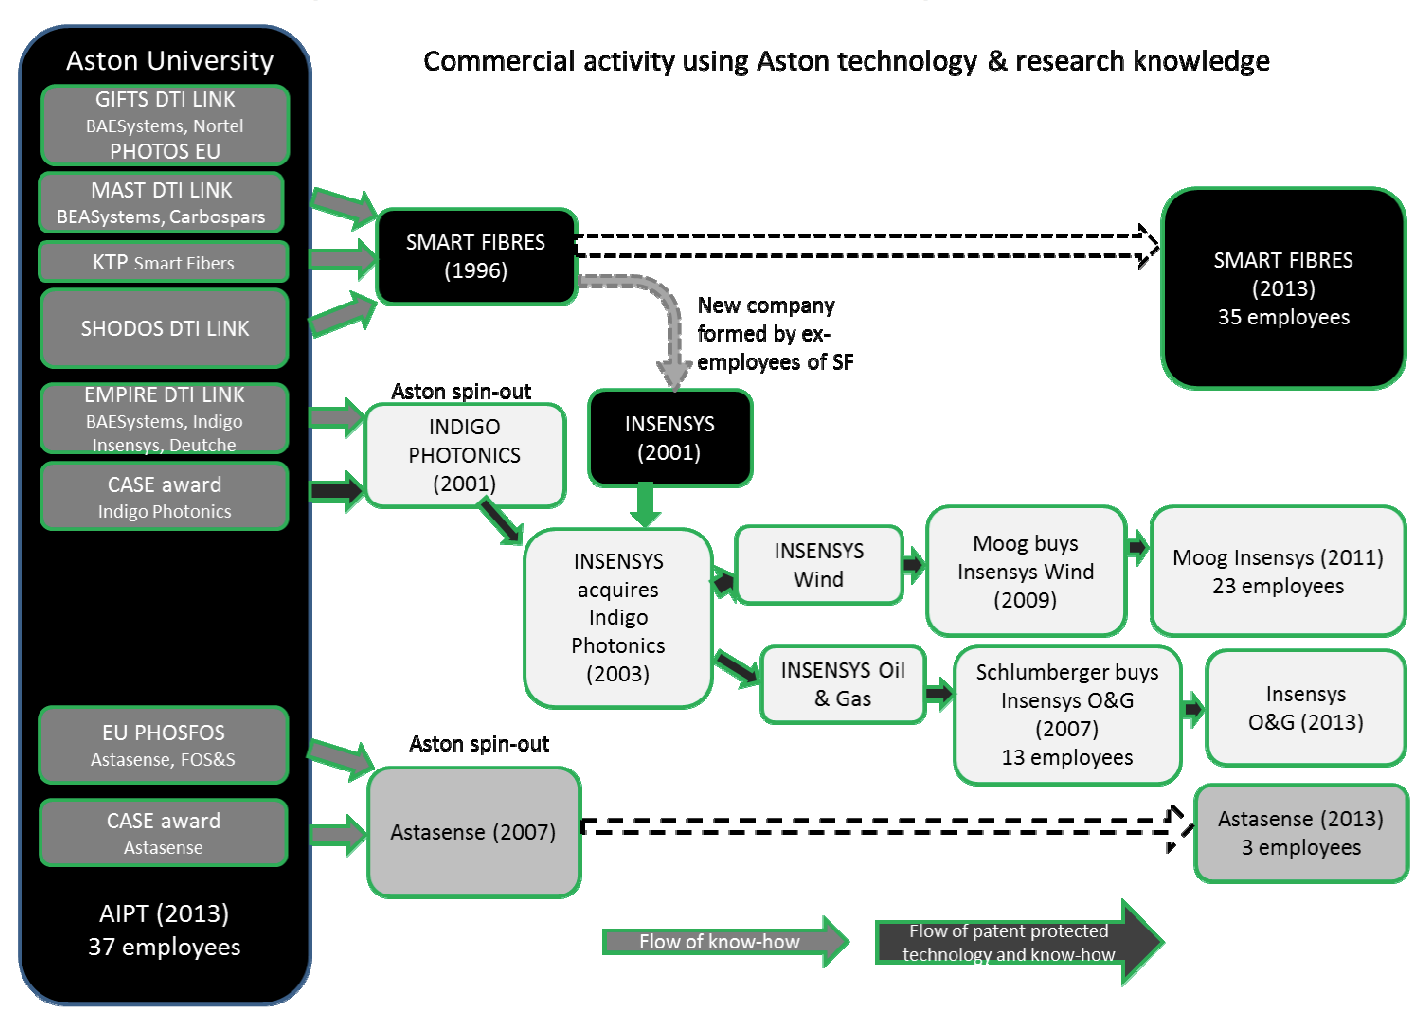 Figure 1: schematic tracing the complex relationship between commercial activity in FBG sensing and Aston
research (the dates of company formations and key events are shown in brackets).